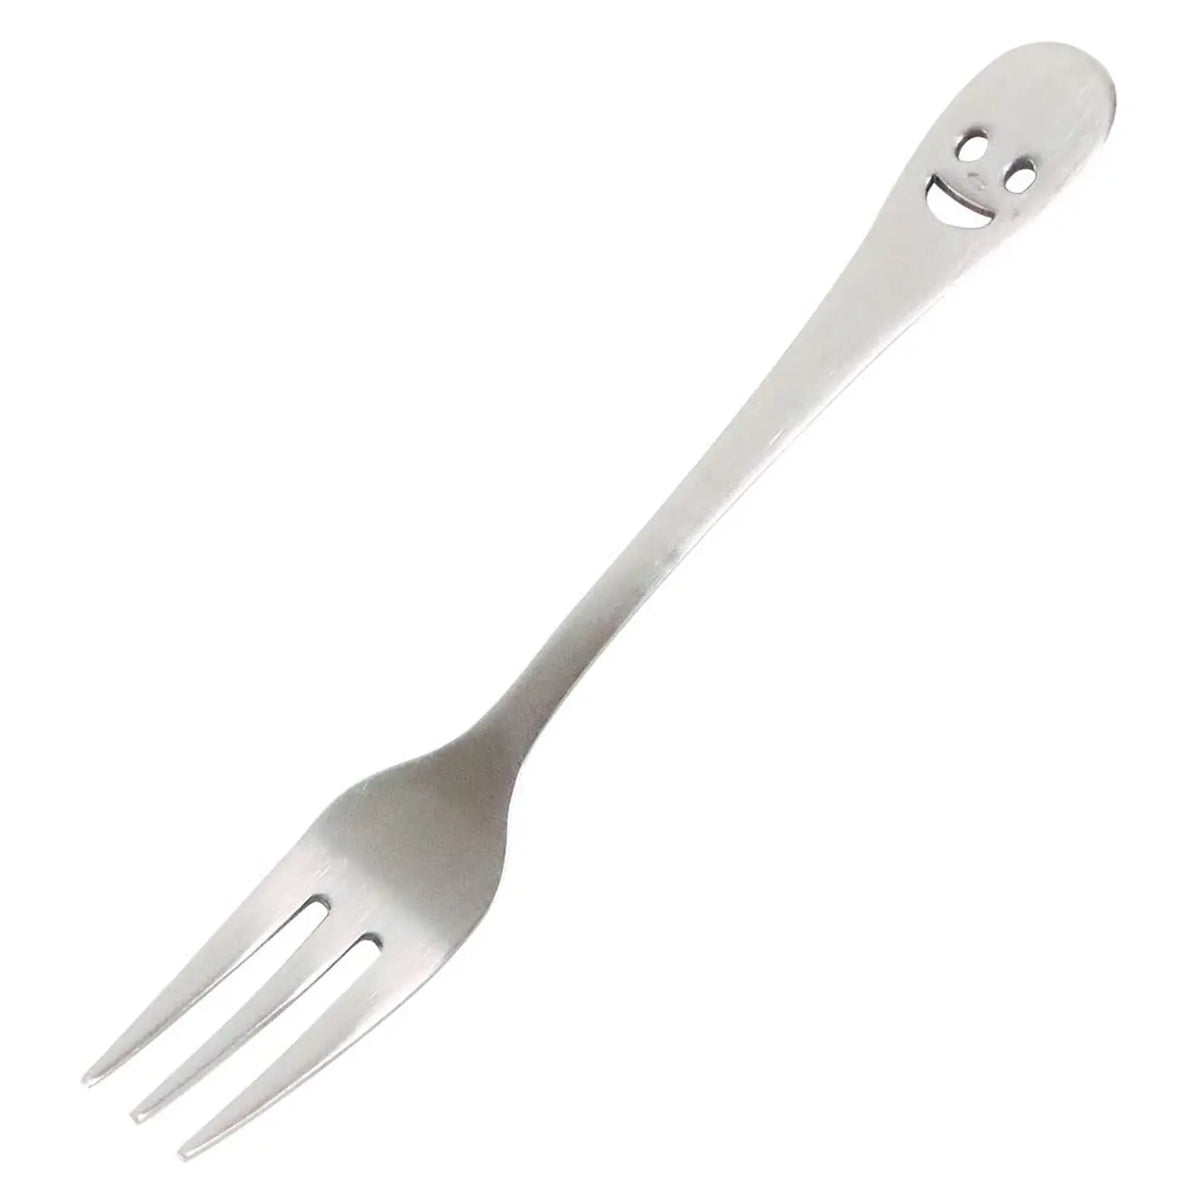 Wada Corporation Nico Stainless Steel Pastry Fork 13.1cm